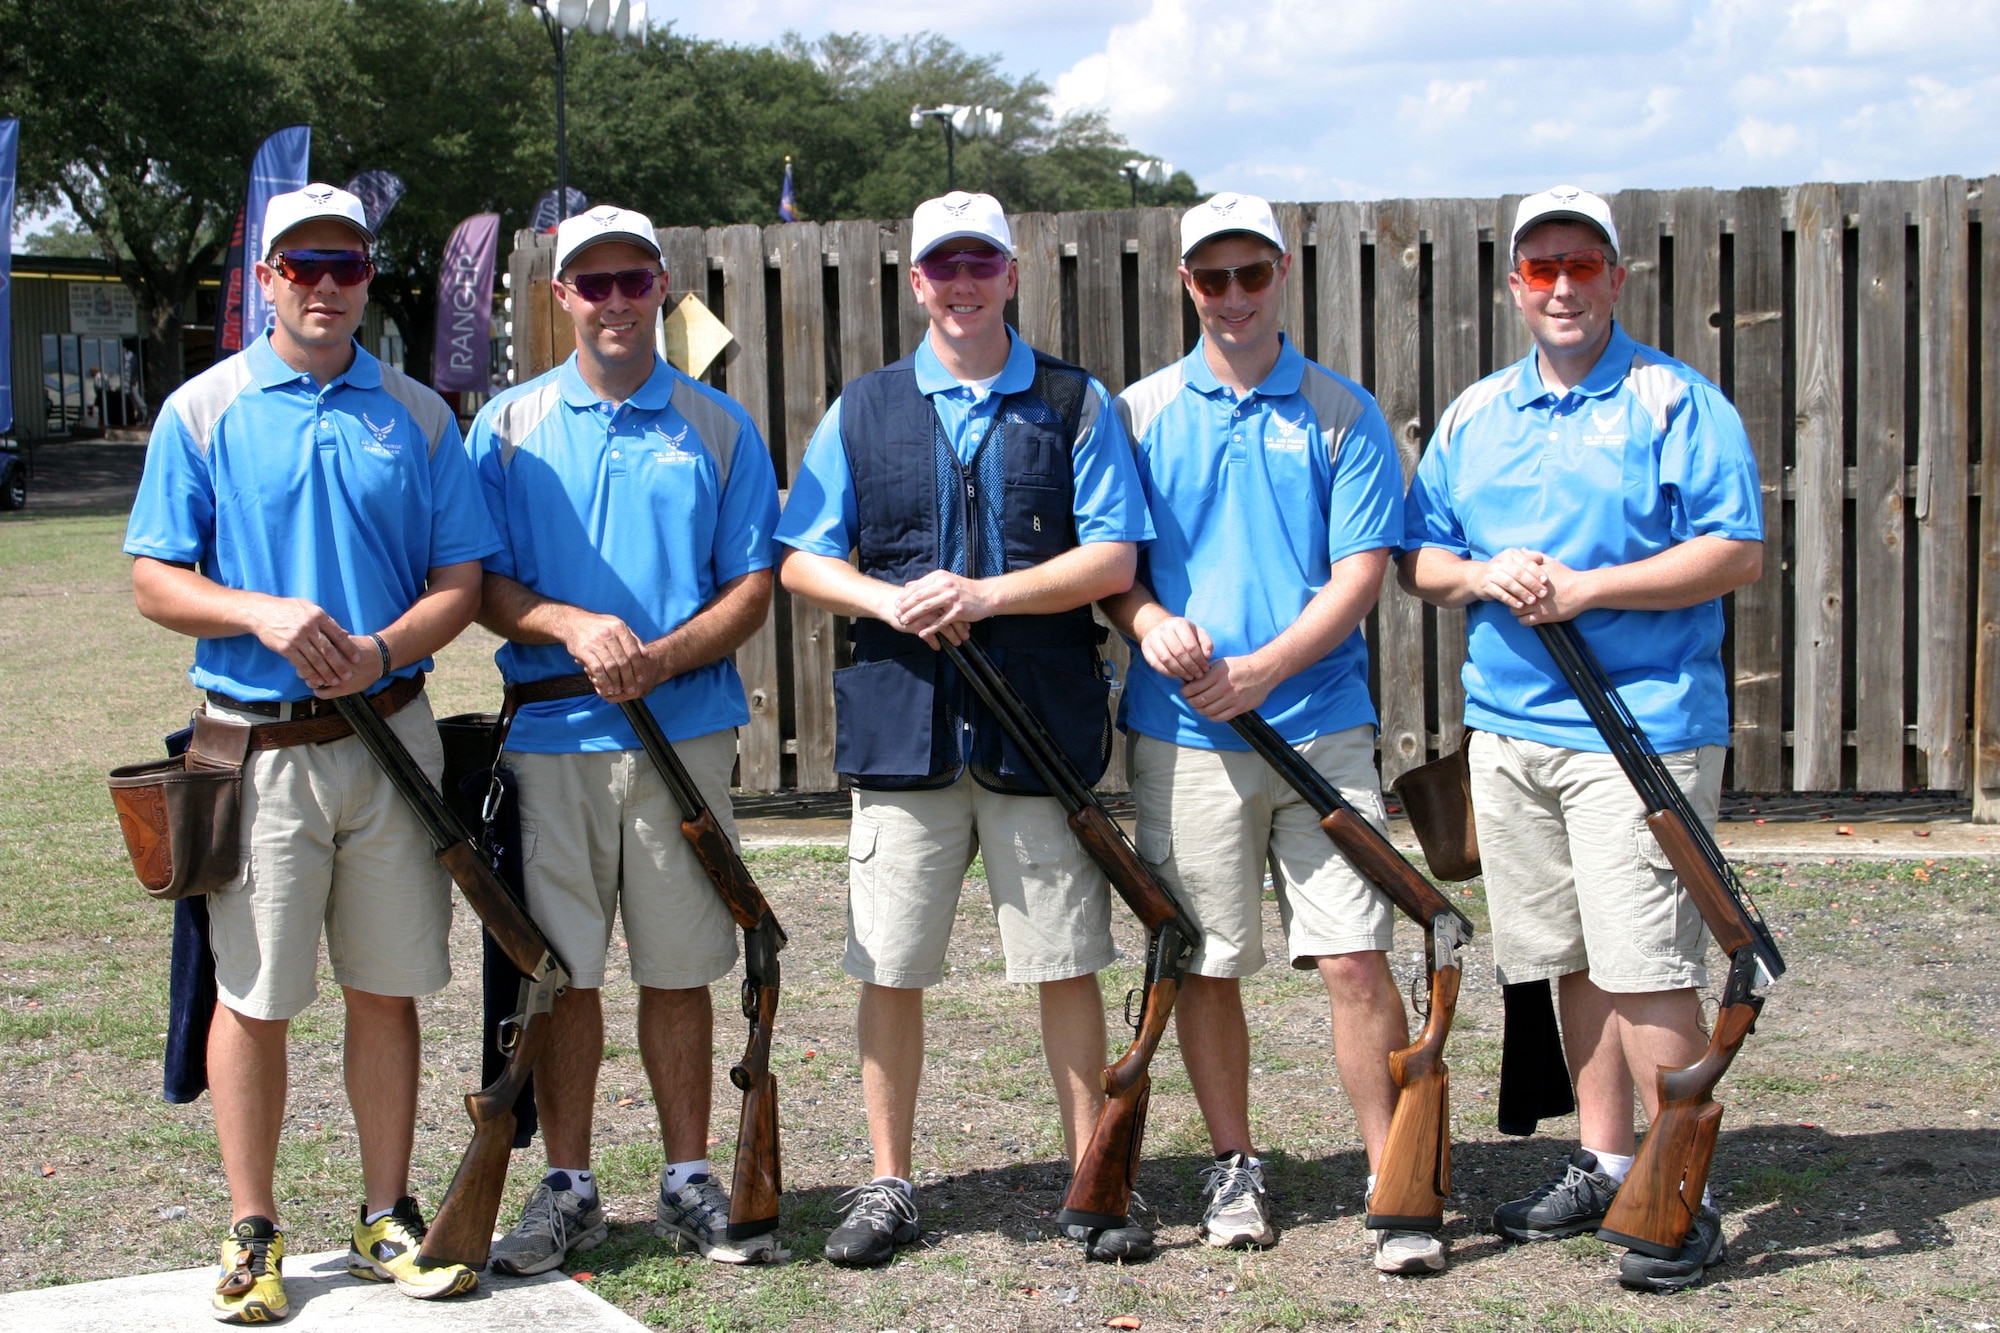 Members of the Air Force skeet shooting team pose for a group photo during the 2014 World Skeet Championship at the National Shooting Complex, San Antonio, Texas, Sept. 26, 2014. The team claimed the Five-Man World Military Champion title, beating the Marine Corps in every event they participated in. (Courtesy photo)